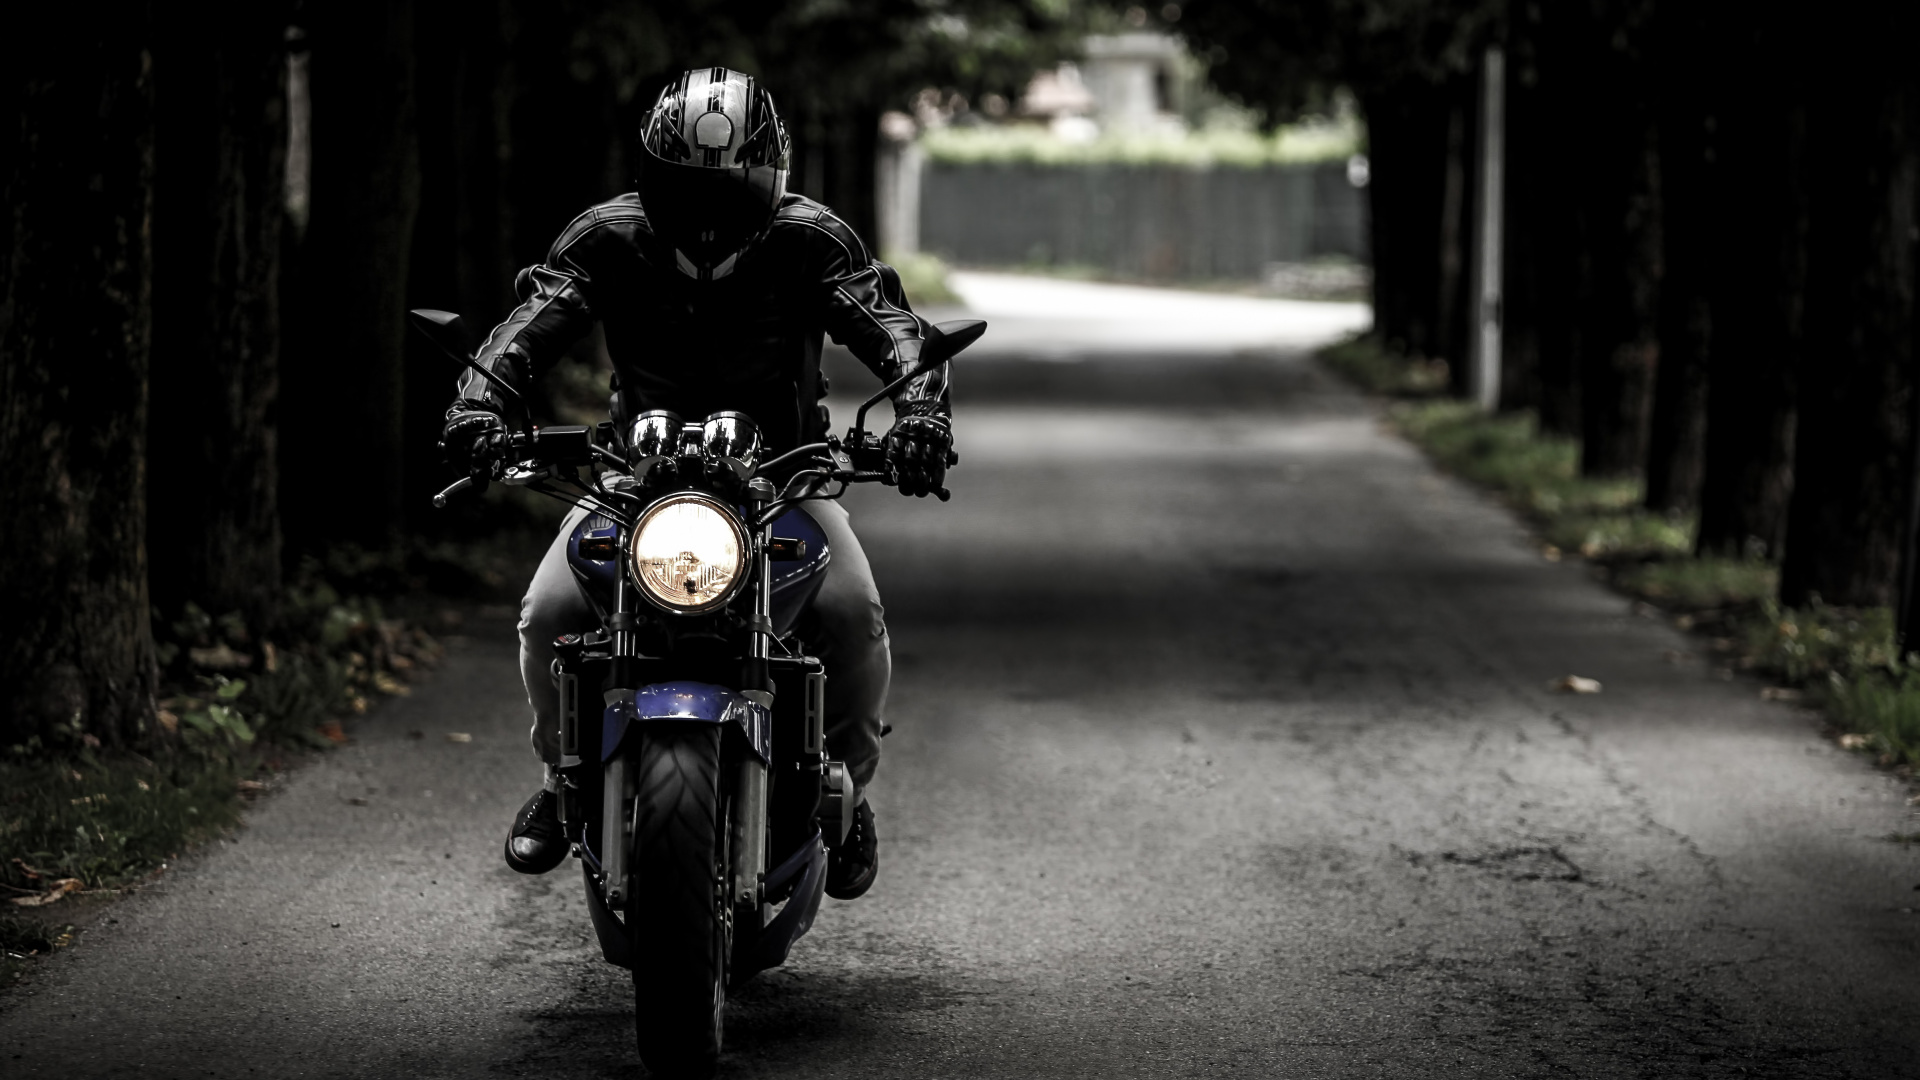 Man in Black Helmet Riding Motorcycle on Road During Daytime. Wallpaper in 1920x1080 Resolution